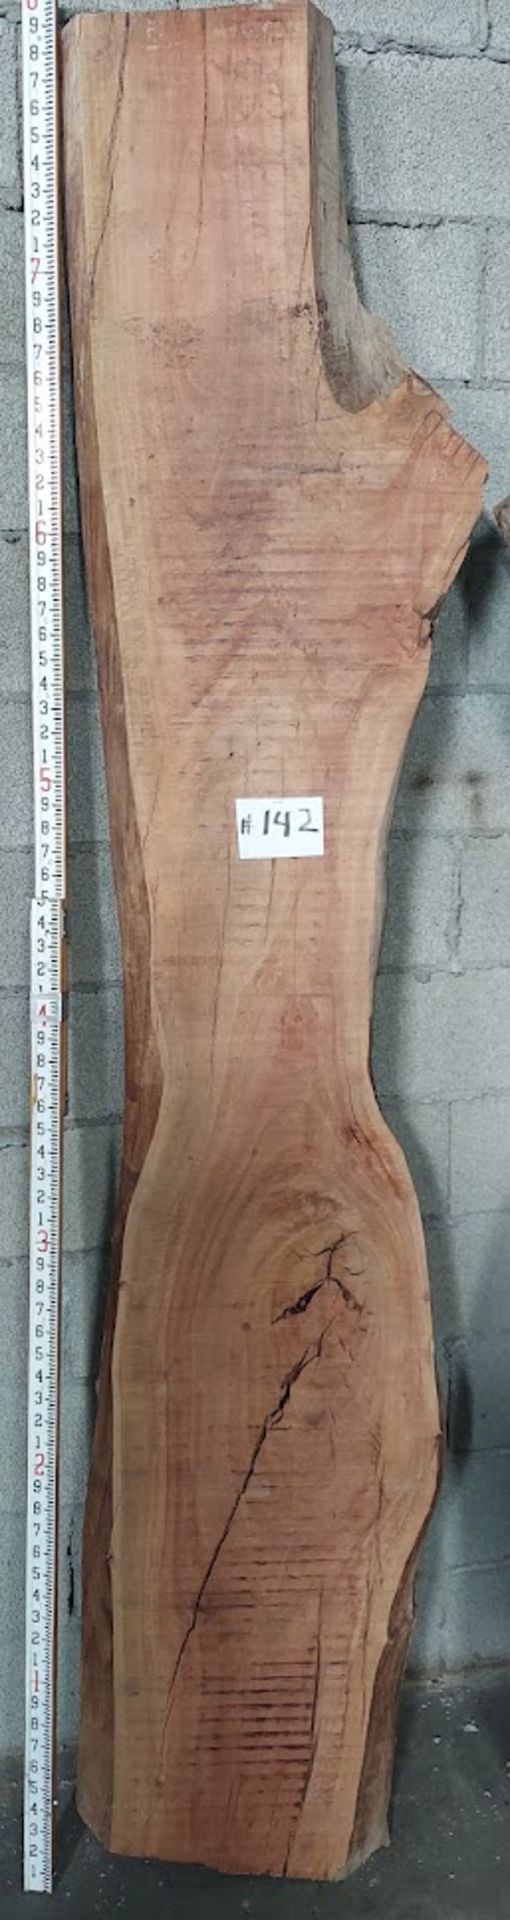 Eucalyptus Hardwood Lumber Slab, Size is approx. 95" x 11" - 18" x 2-1/2" Thick (Book Matched